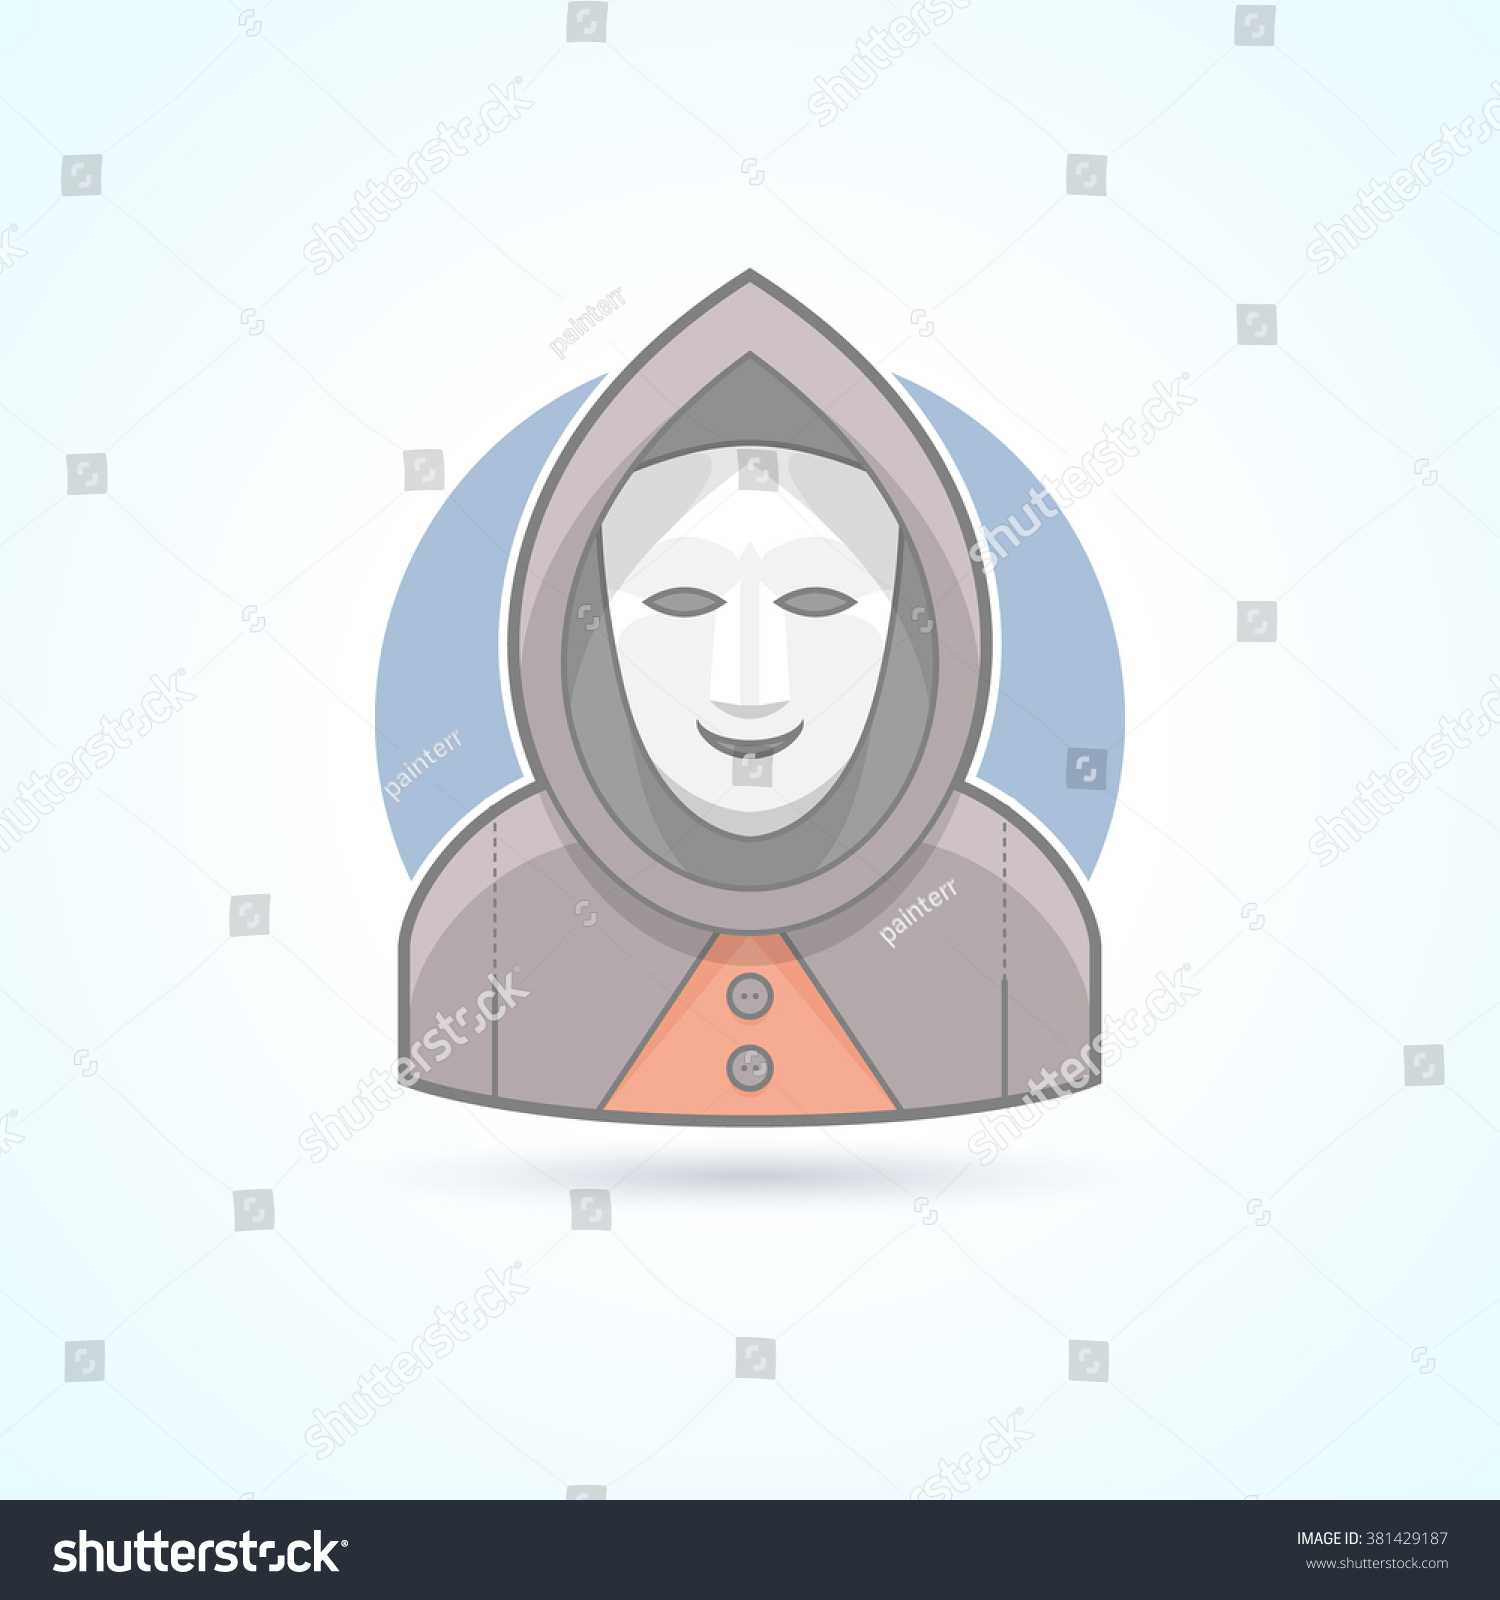 SVG of Anonymity, stranger, mask man, mysterious guy icon. Avatar and person illustration. Flat colored outlined style. Vector illustration. svg